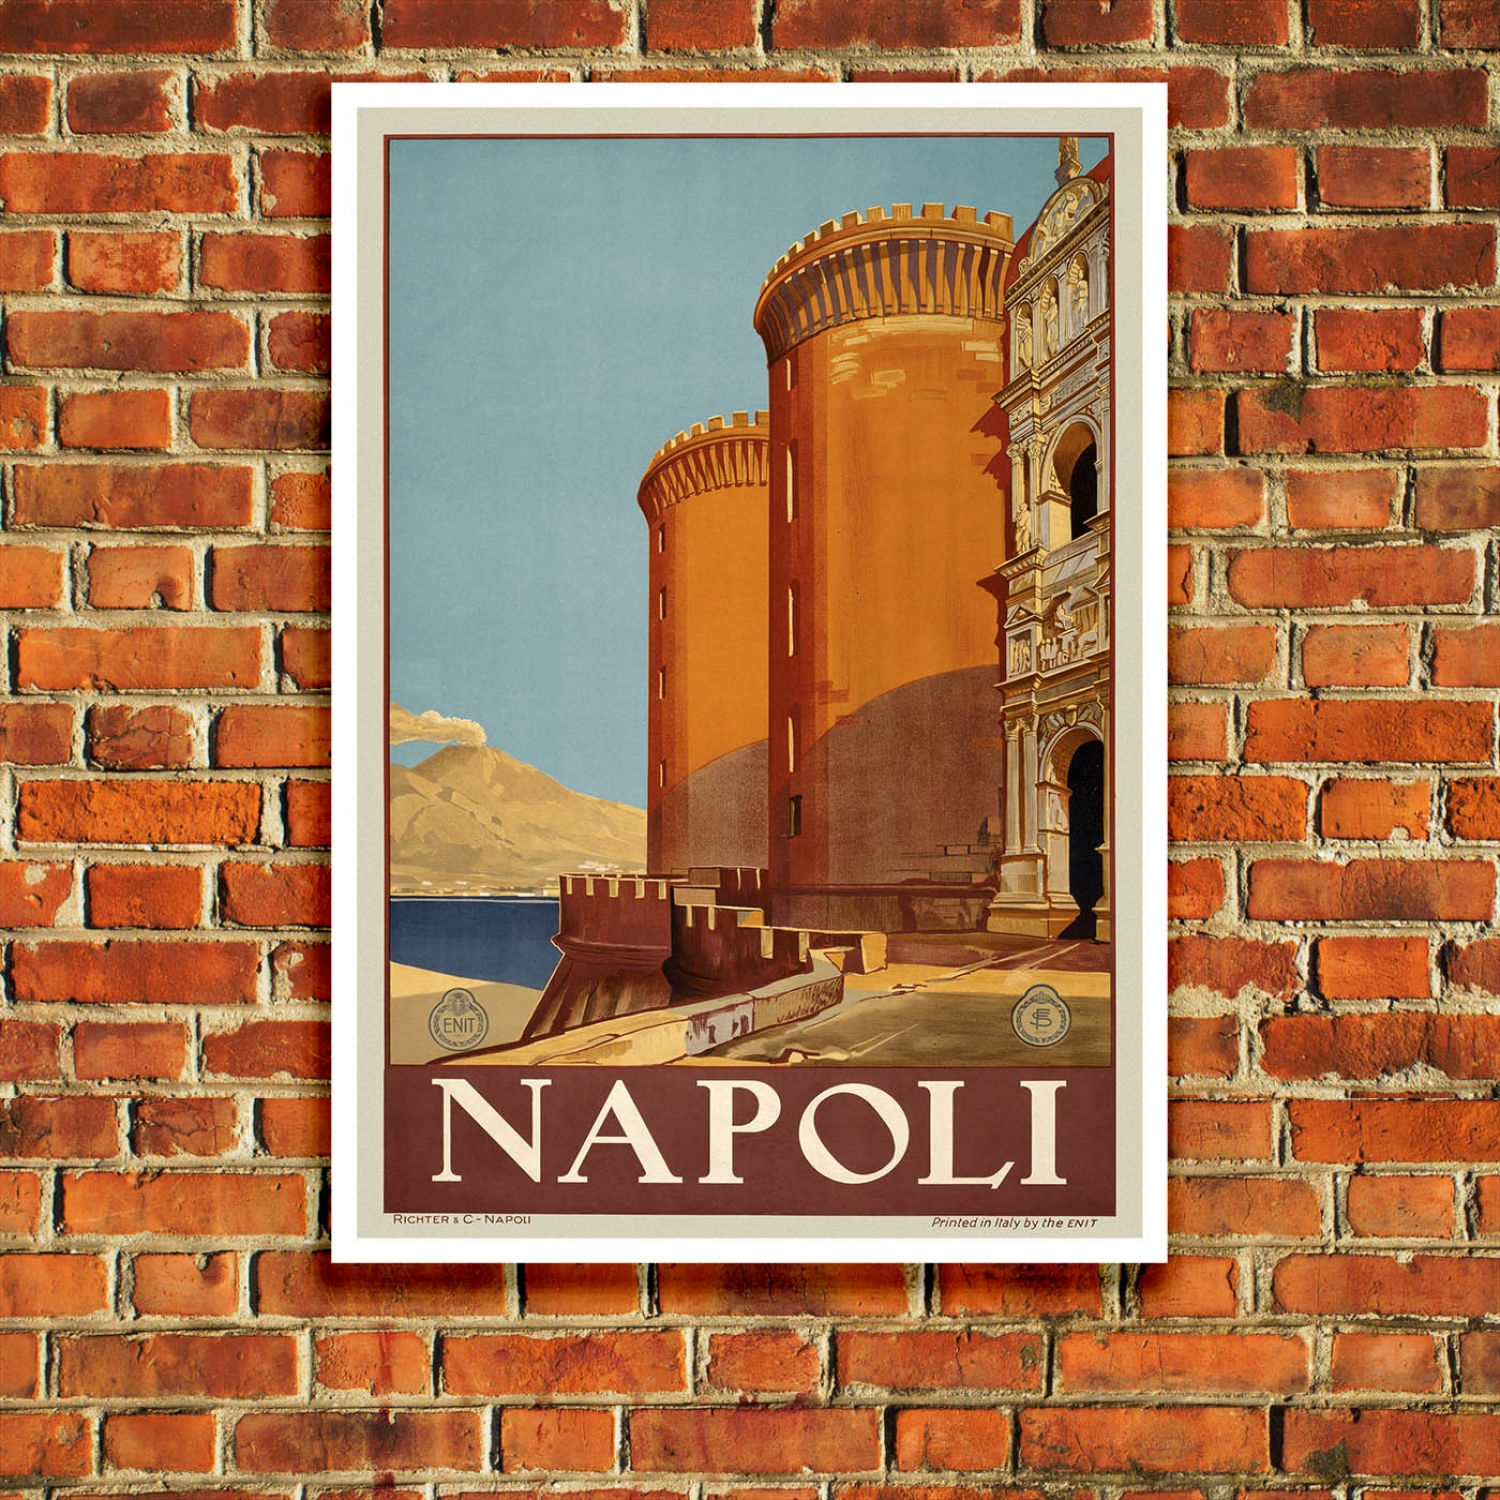 T6 Vintage 1920's Italy Naples Napoli Italian Travel Poster A1 A2 A3 